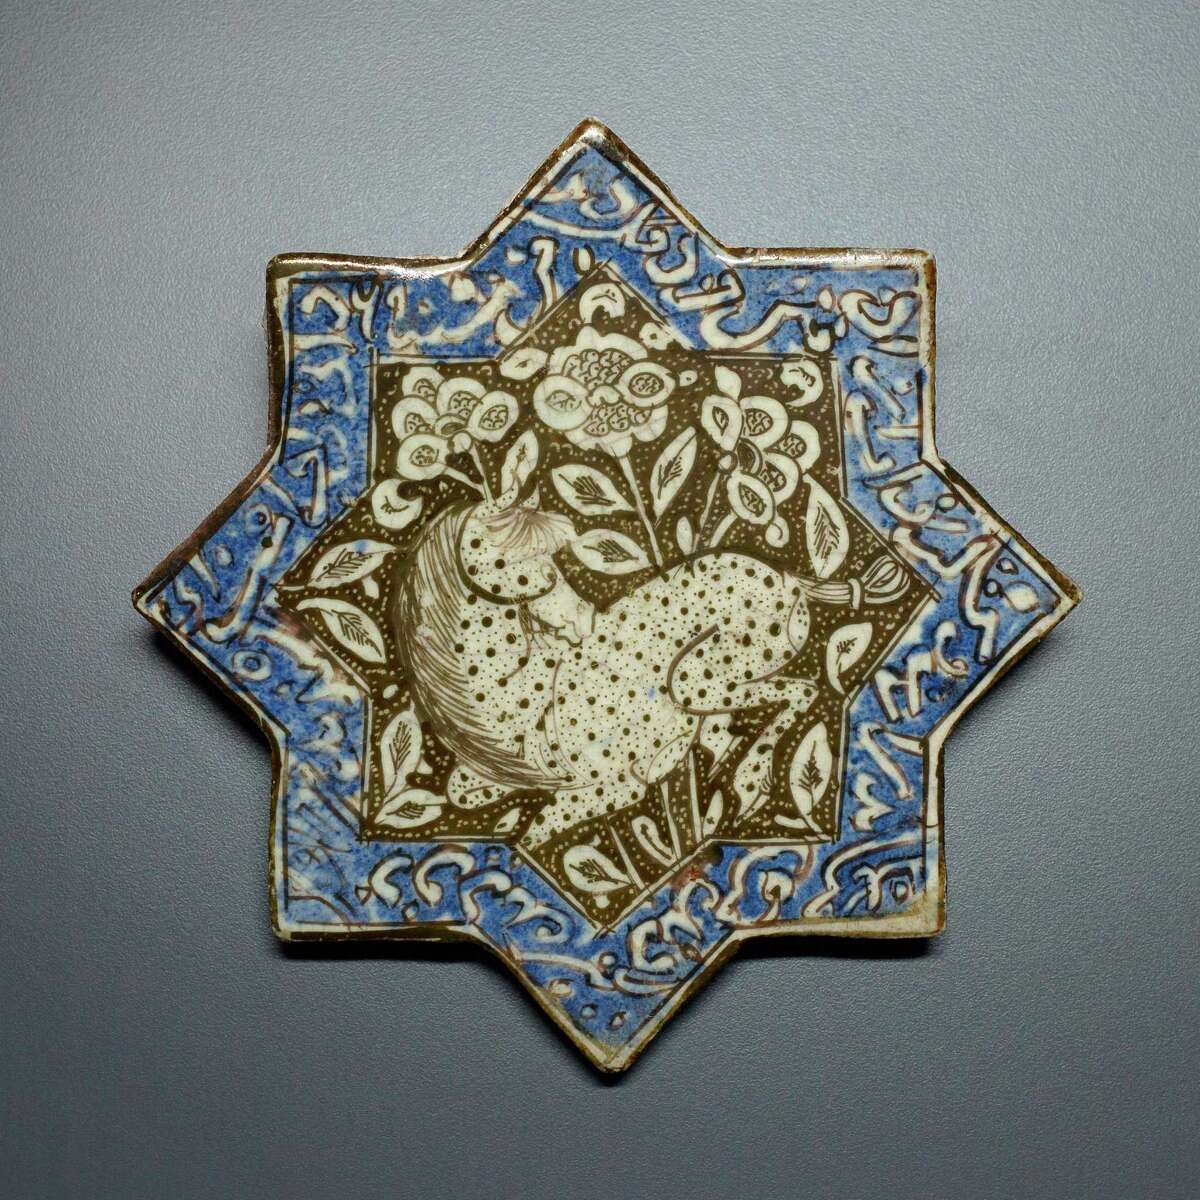 Calligraphy borders a 13th-century star tile from Iran, one of many intricate items in "Bestowing Beauty" at the Museum of Fine Arts, Houston.